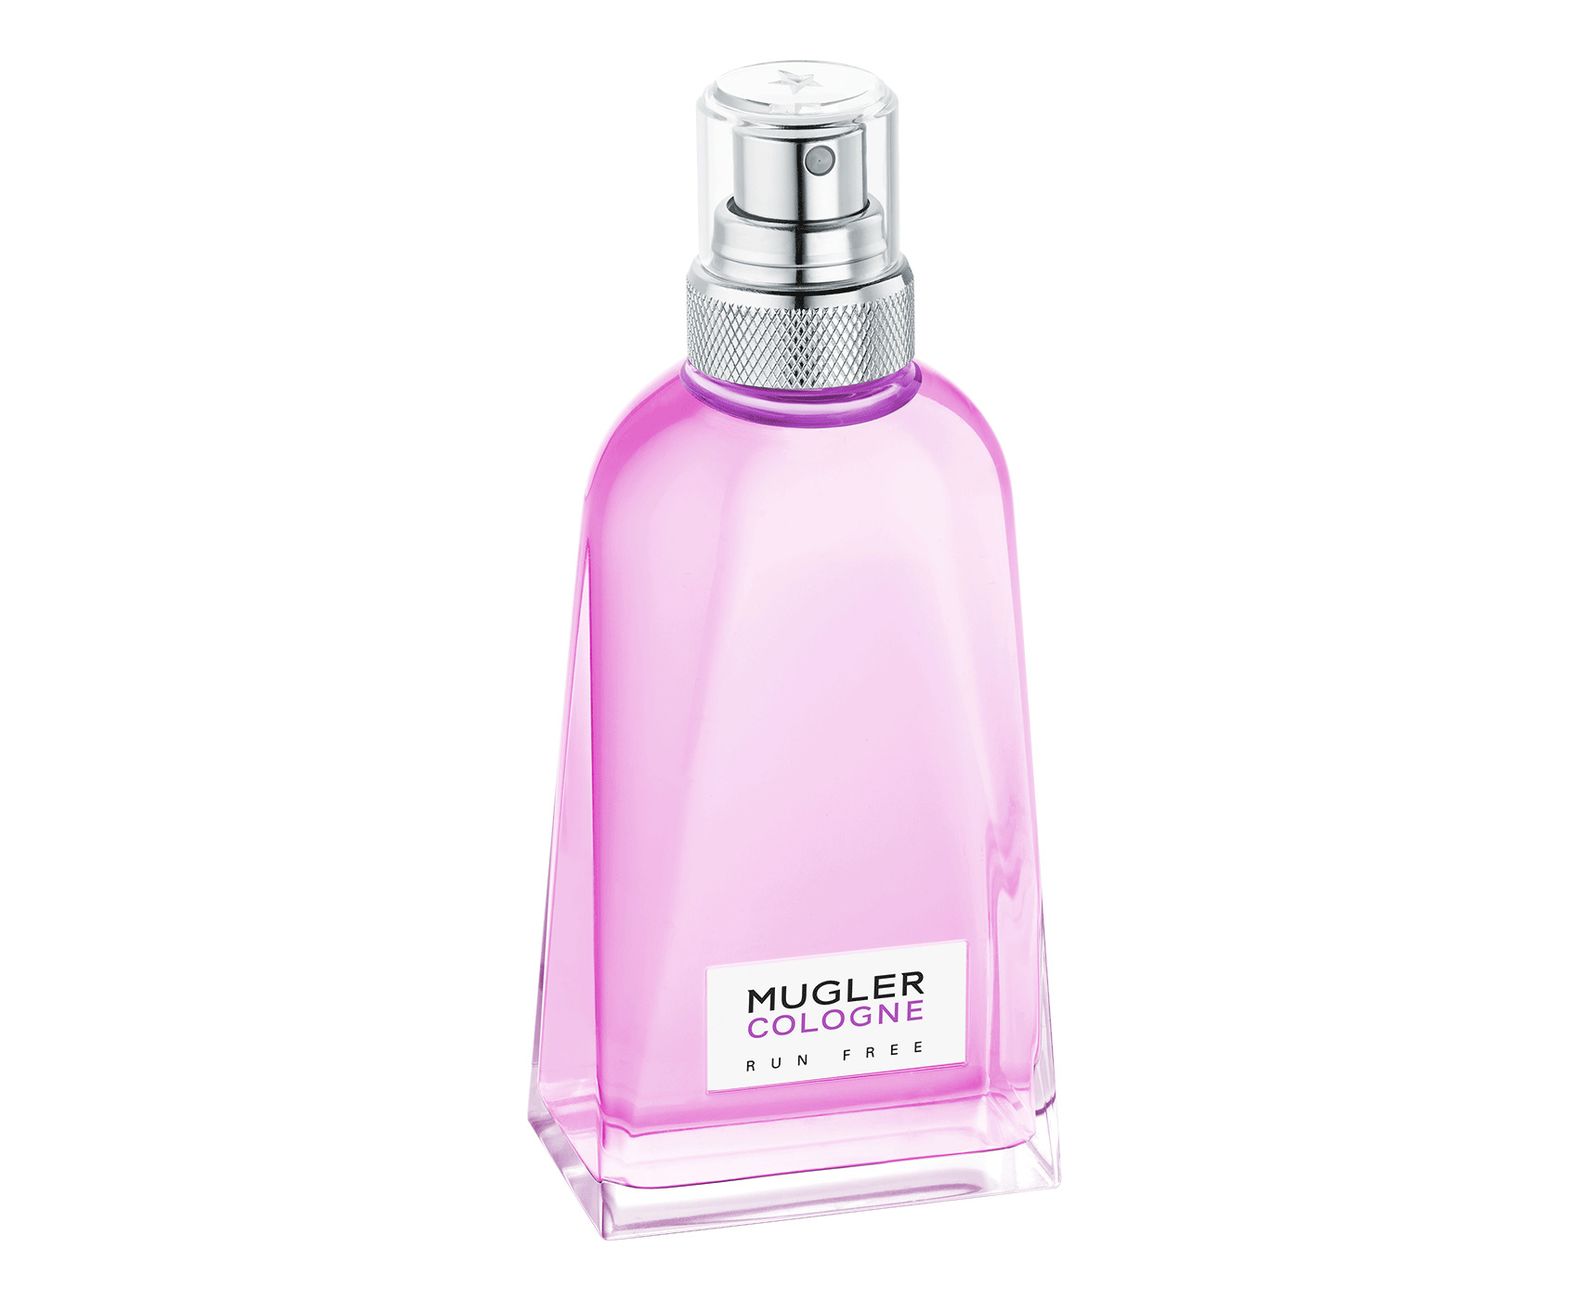 Cologne туалетная вода. Туалетная вода Mugler Cologne. Mugler Cologne Fly away. Мюглер Кологне духи. Thierry Mugler - Cologne take me out.